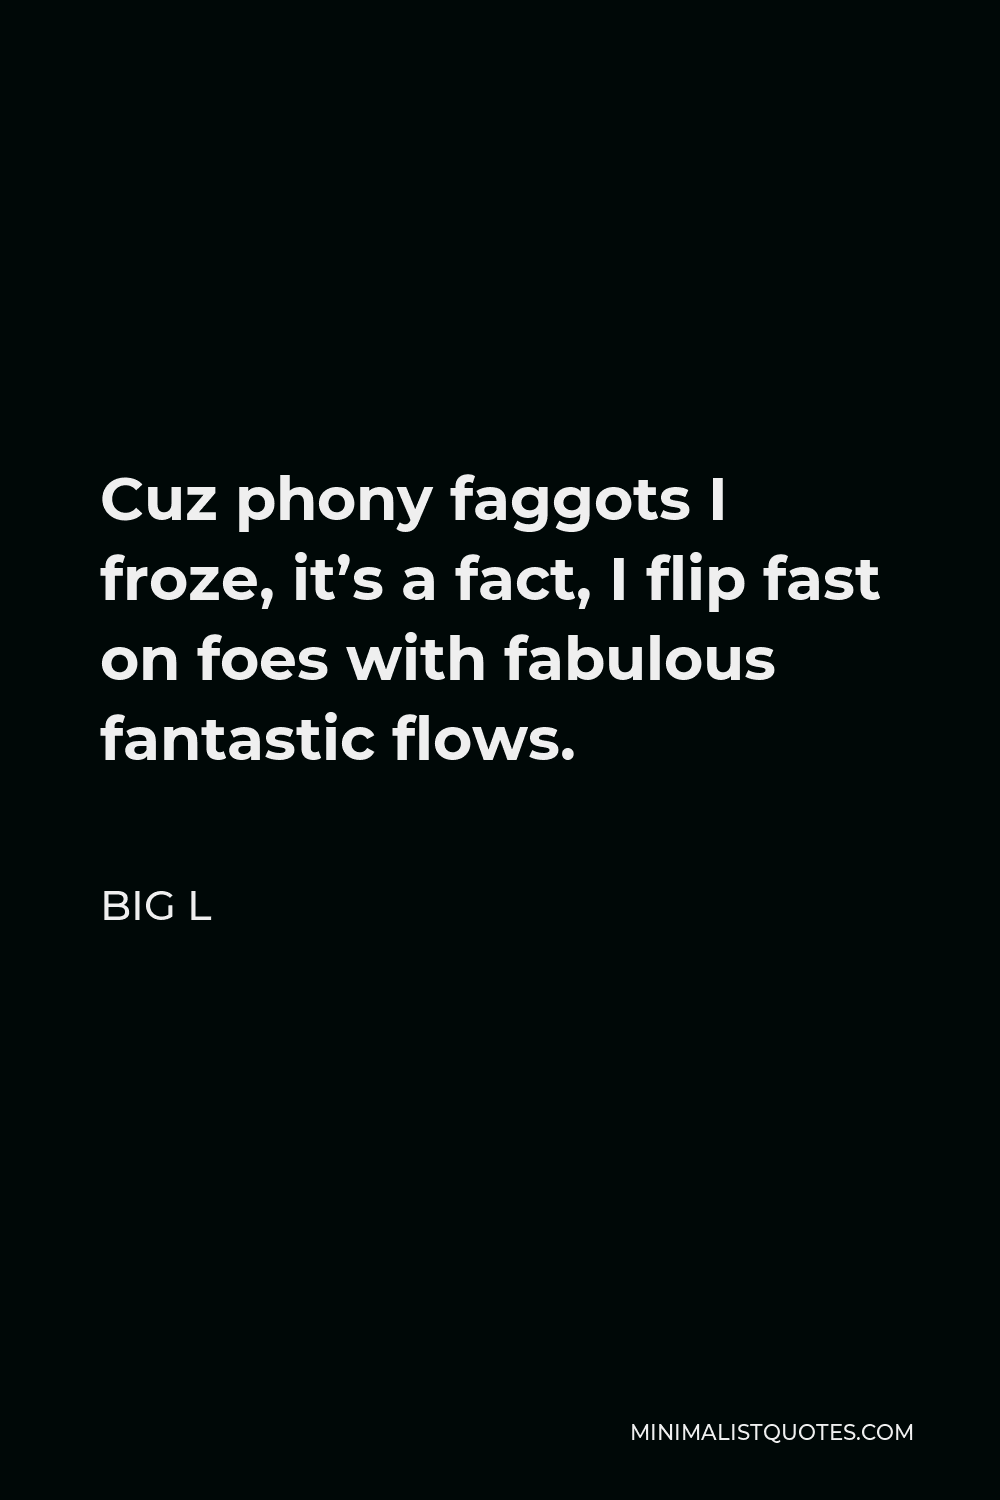 Big L Quote - Cuz phony faggots I froze, it’s a fact, I flip fast on foes with fabulous fantastic flows.